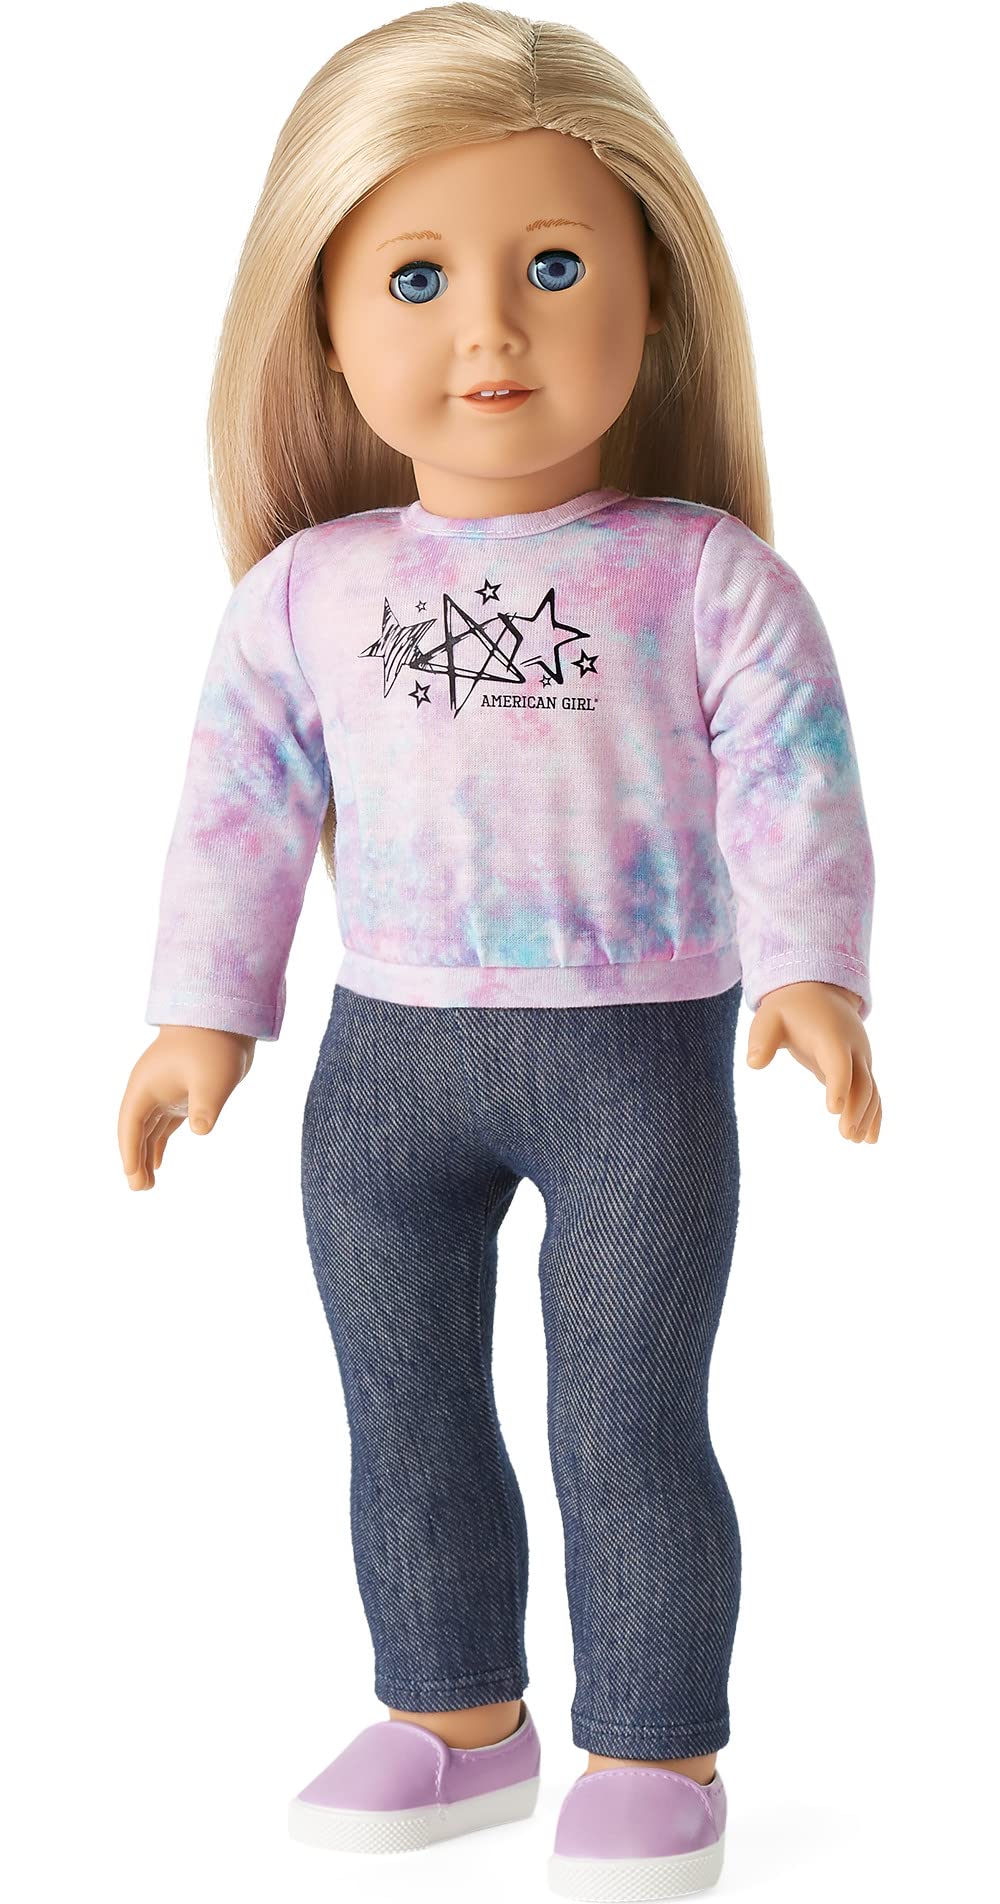 American Girl Truly Me 18-inch Doll 27 and School Day to Soccer Play Set with Blue Eyes, Layered Blonde Hair, Light-to-Medium Skin, Warm Undertones, tie-dye Sweatshirt, Supplies, Game Gear Ages 6+